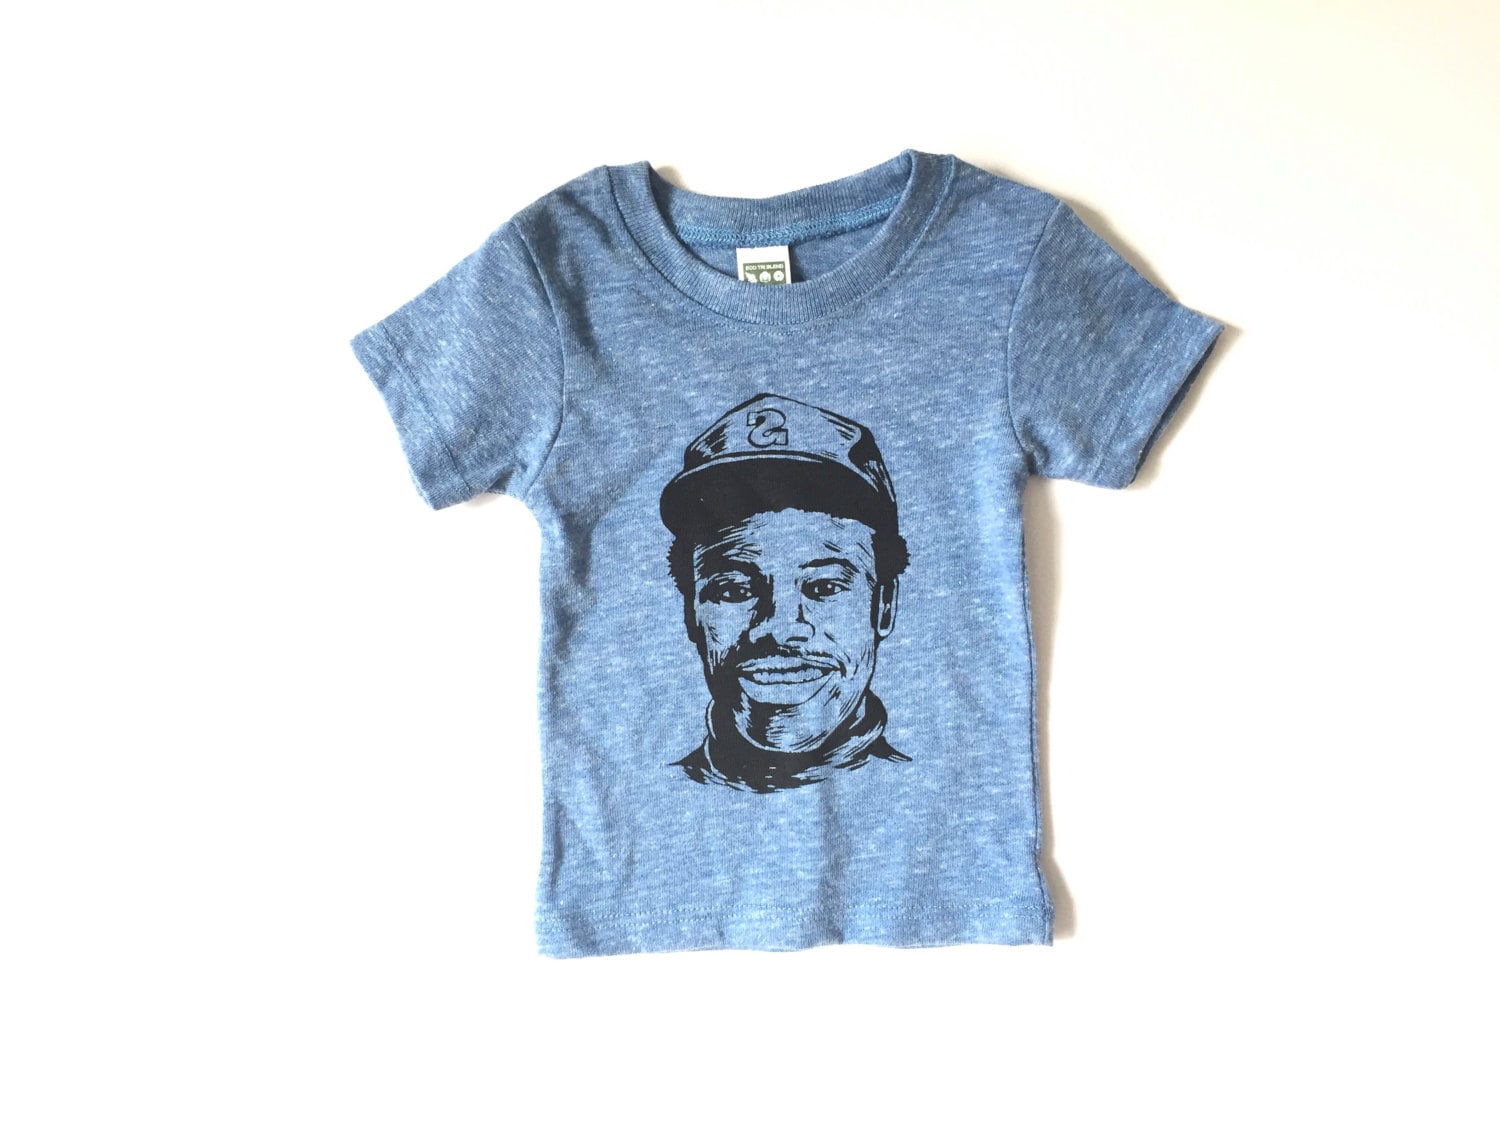 THE KID KEN GRIFFEY JR INSPIRED BASEBALL T-SHIRT *MANY SIZE AND COLOR OPTIONS*